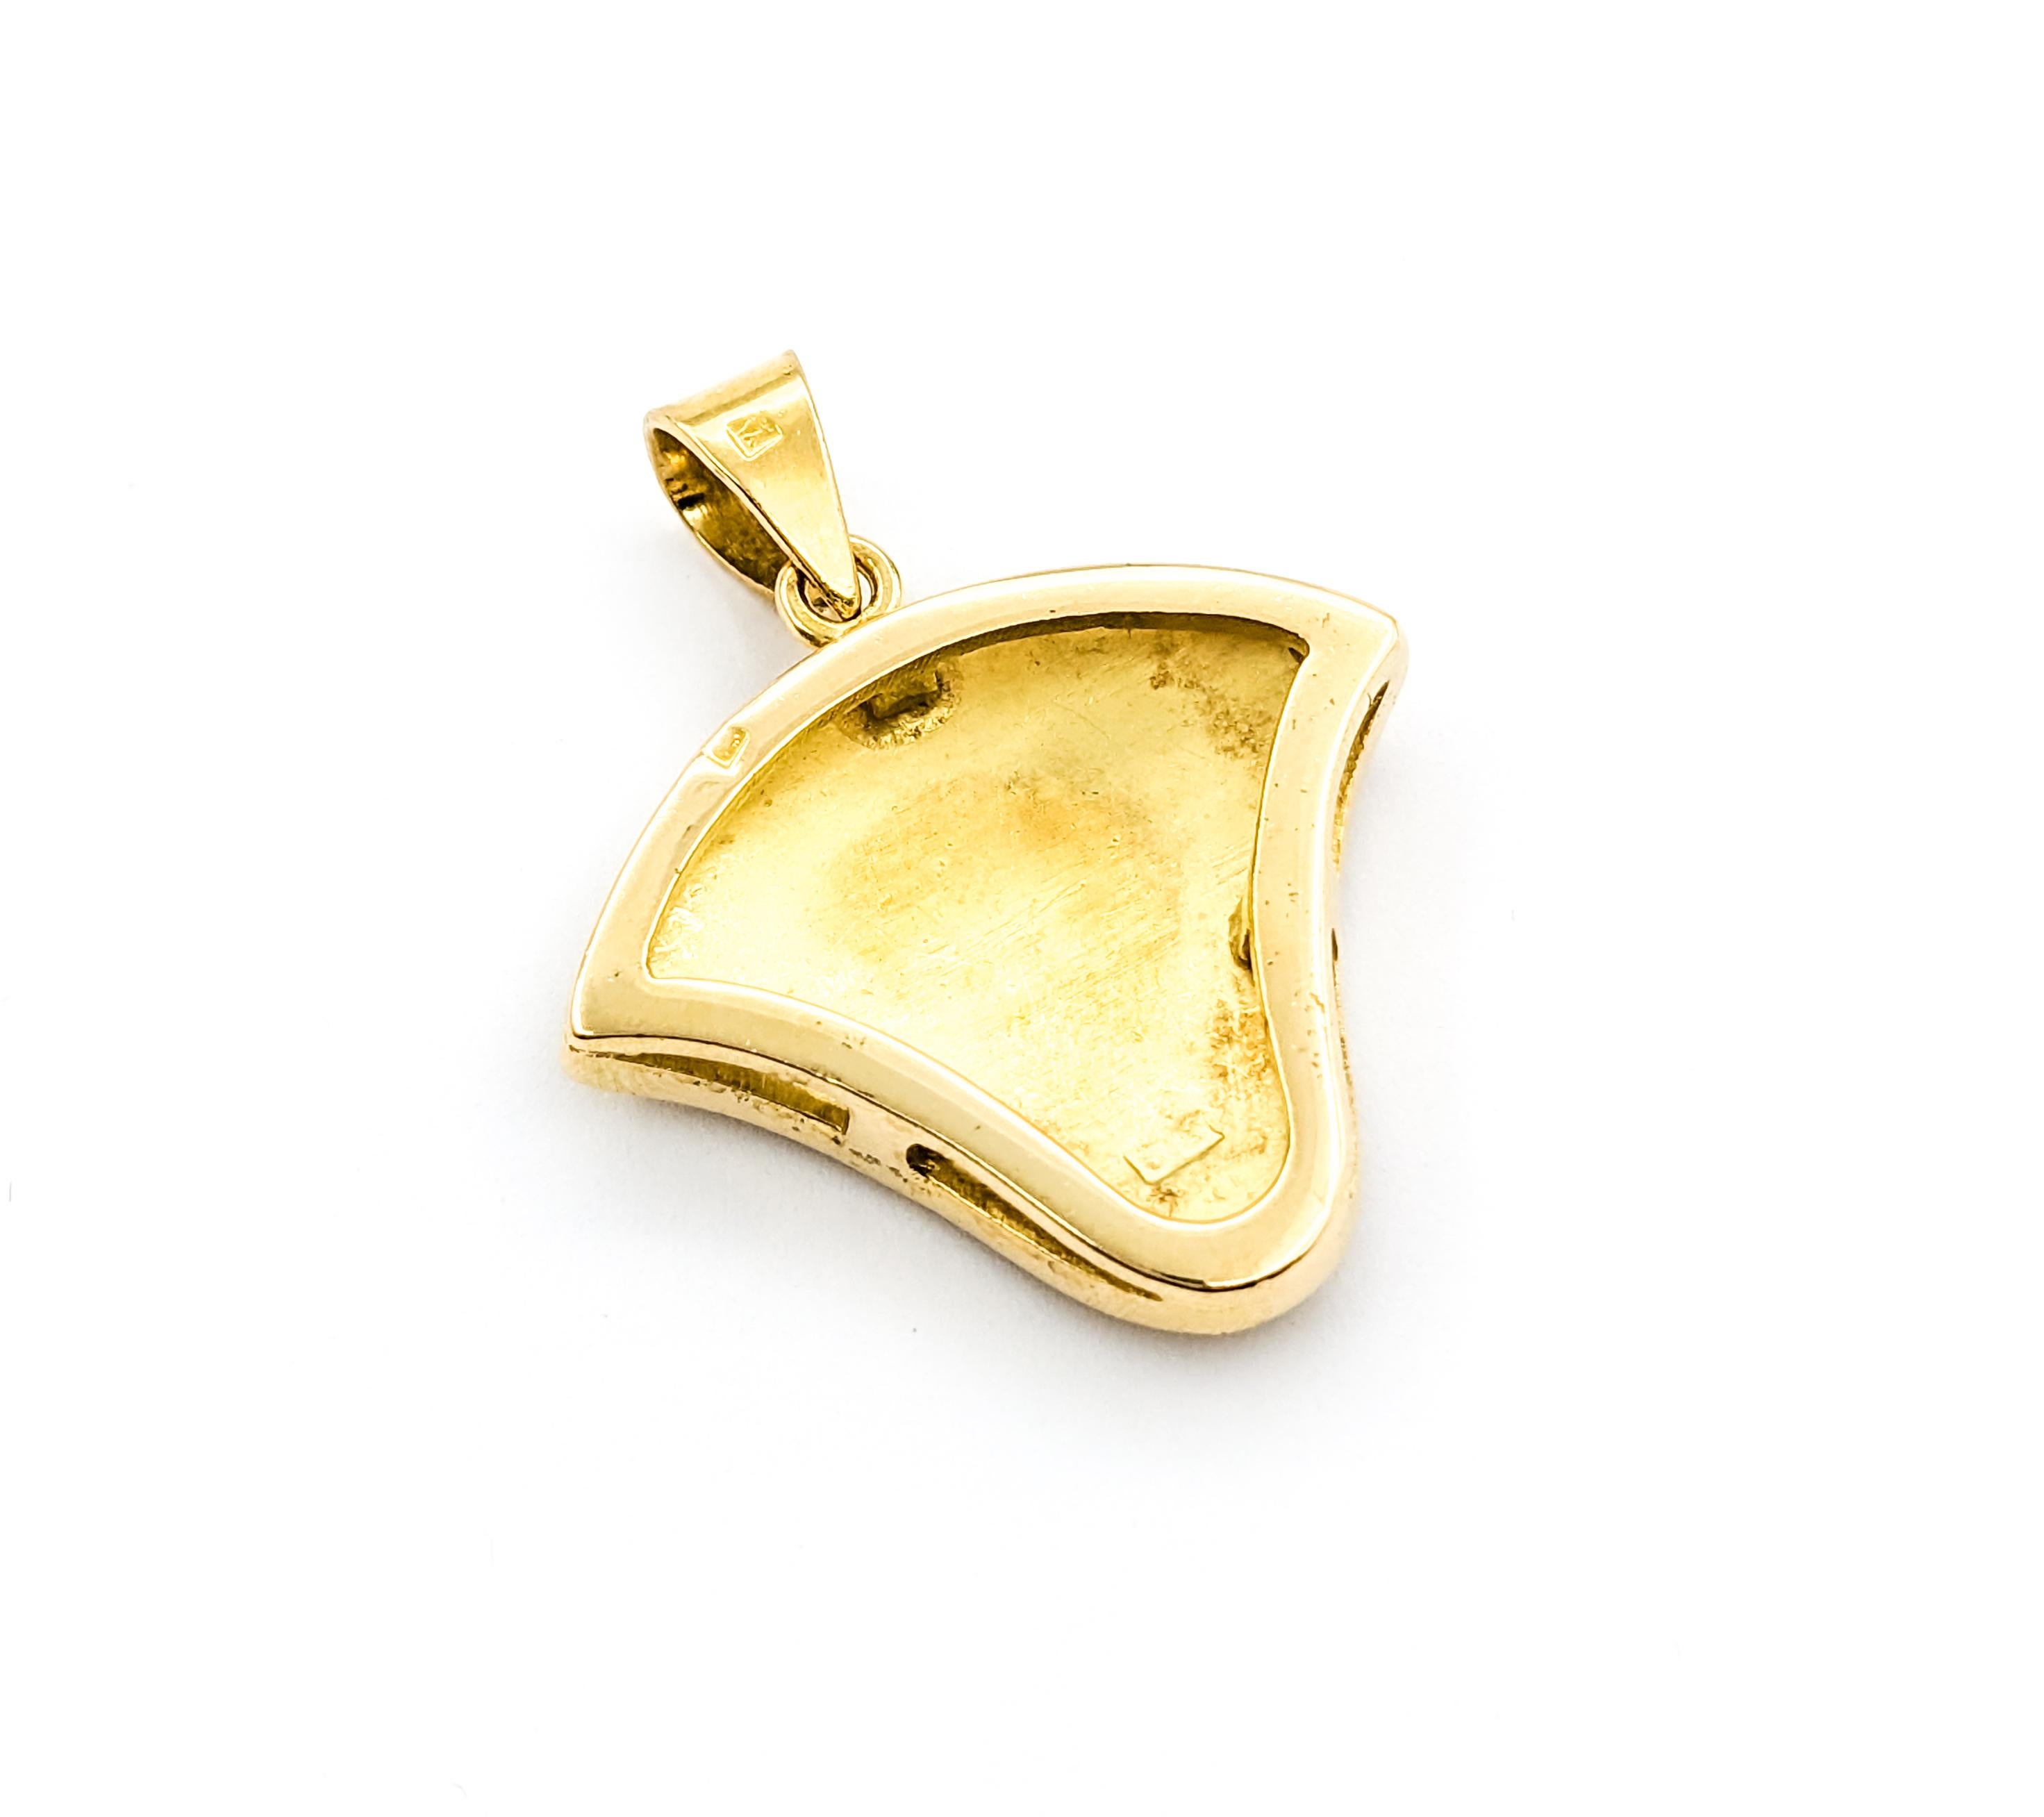 Lotus Flower Pendant In Yellow Gold


This exquisite Gold Fashion Pendant, crafted in rich 18kt yellow gold, takes the shape of a lotus flower, symbolizing purity, enlightenment, self-regeneration, and rebirth. Its dimensions, 34x27mm, make it a